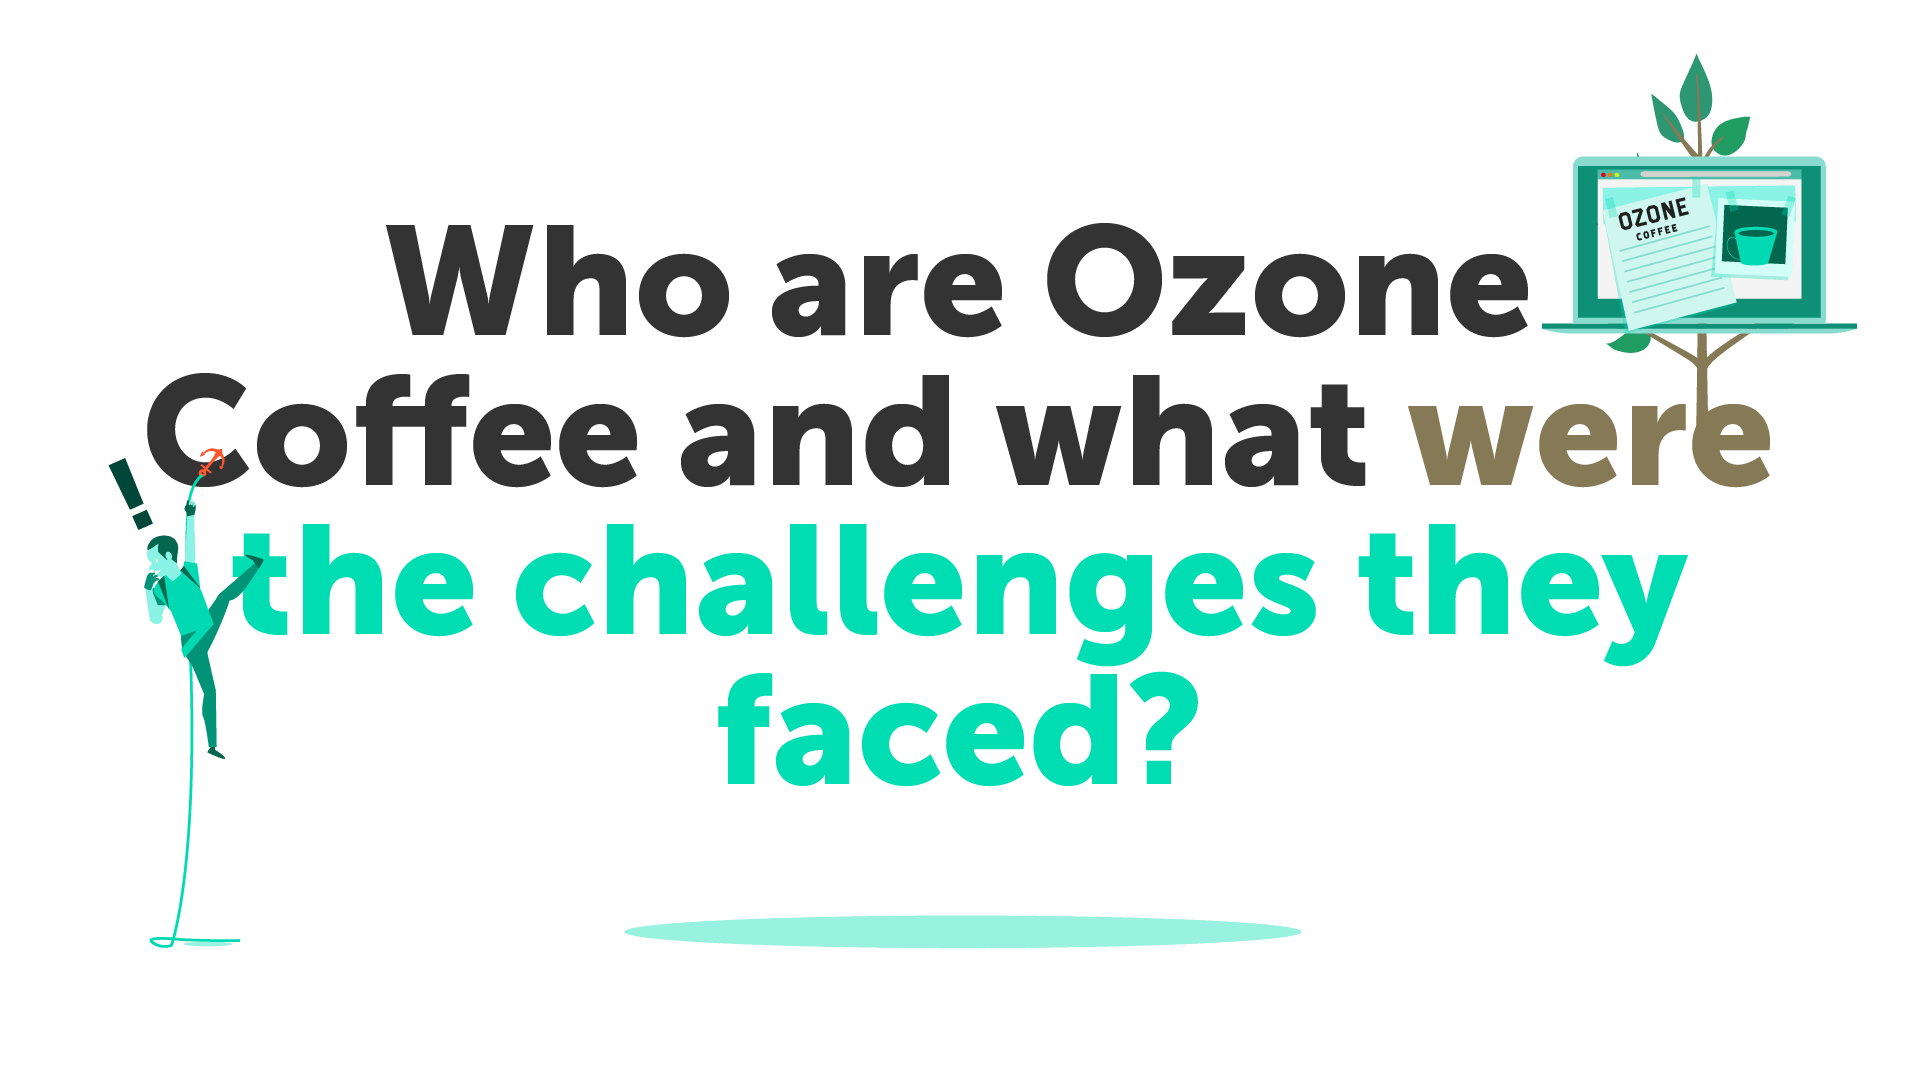 Who are Ozone Coffee and what were the challenges they faced?